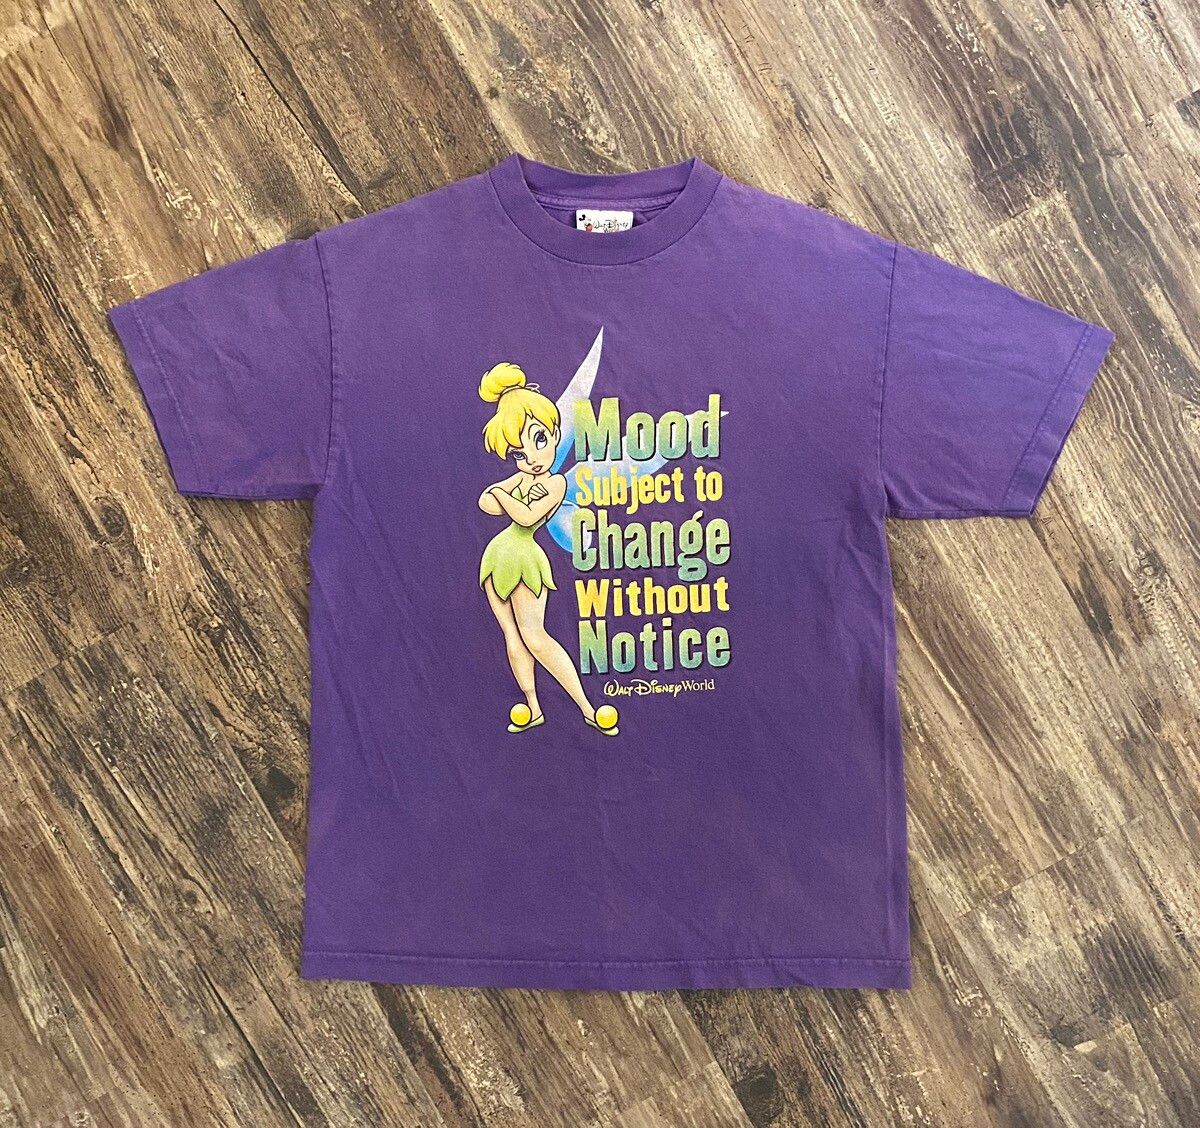 Vintage Vintage 1990s Disney Womens Tinker Bell Faded Shirt Size M / US 6-8 / IT 42-44 - 1 Preview